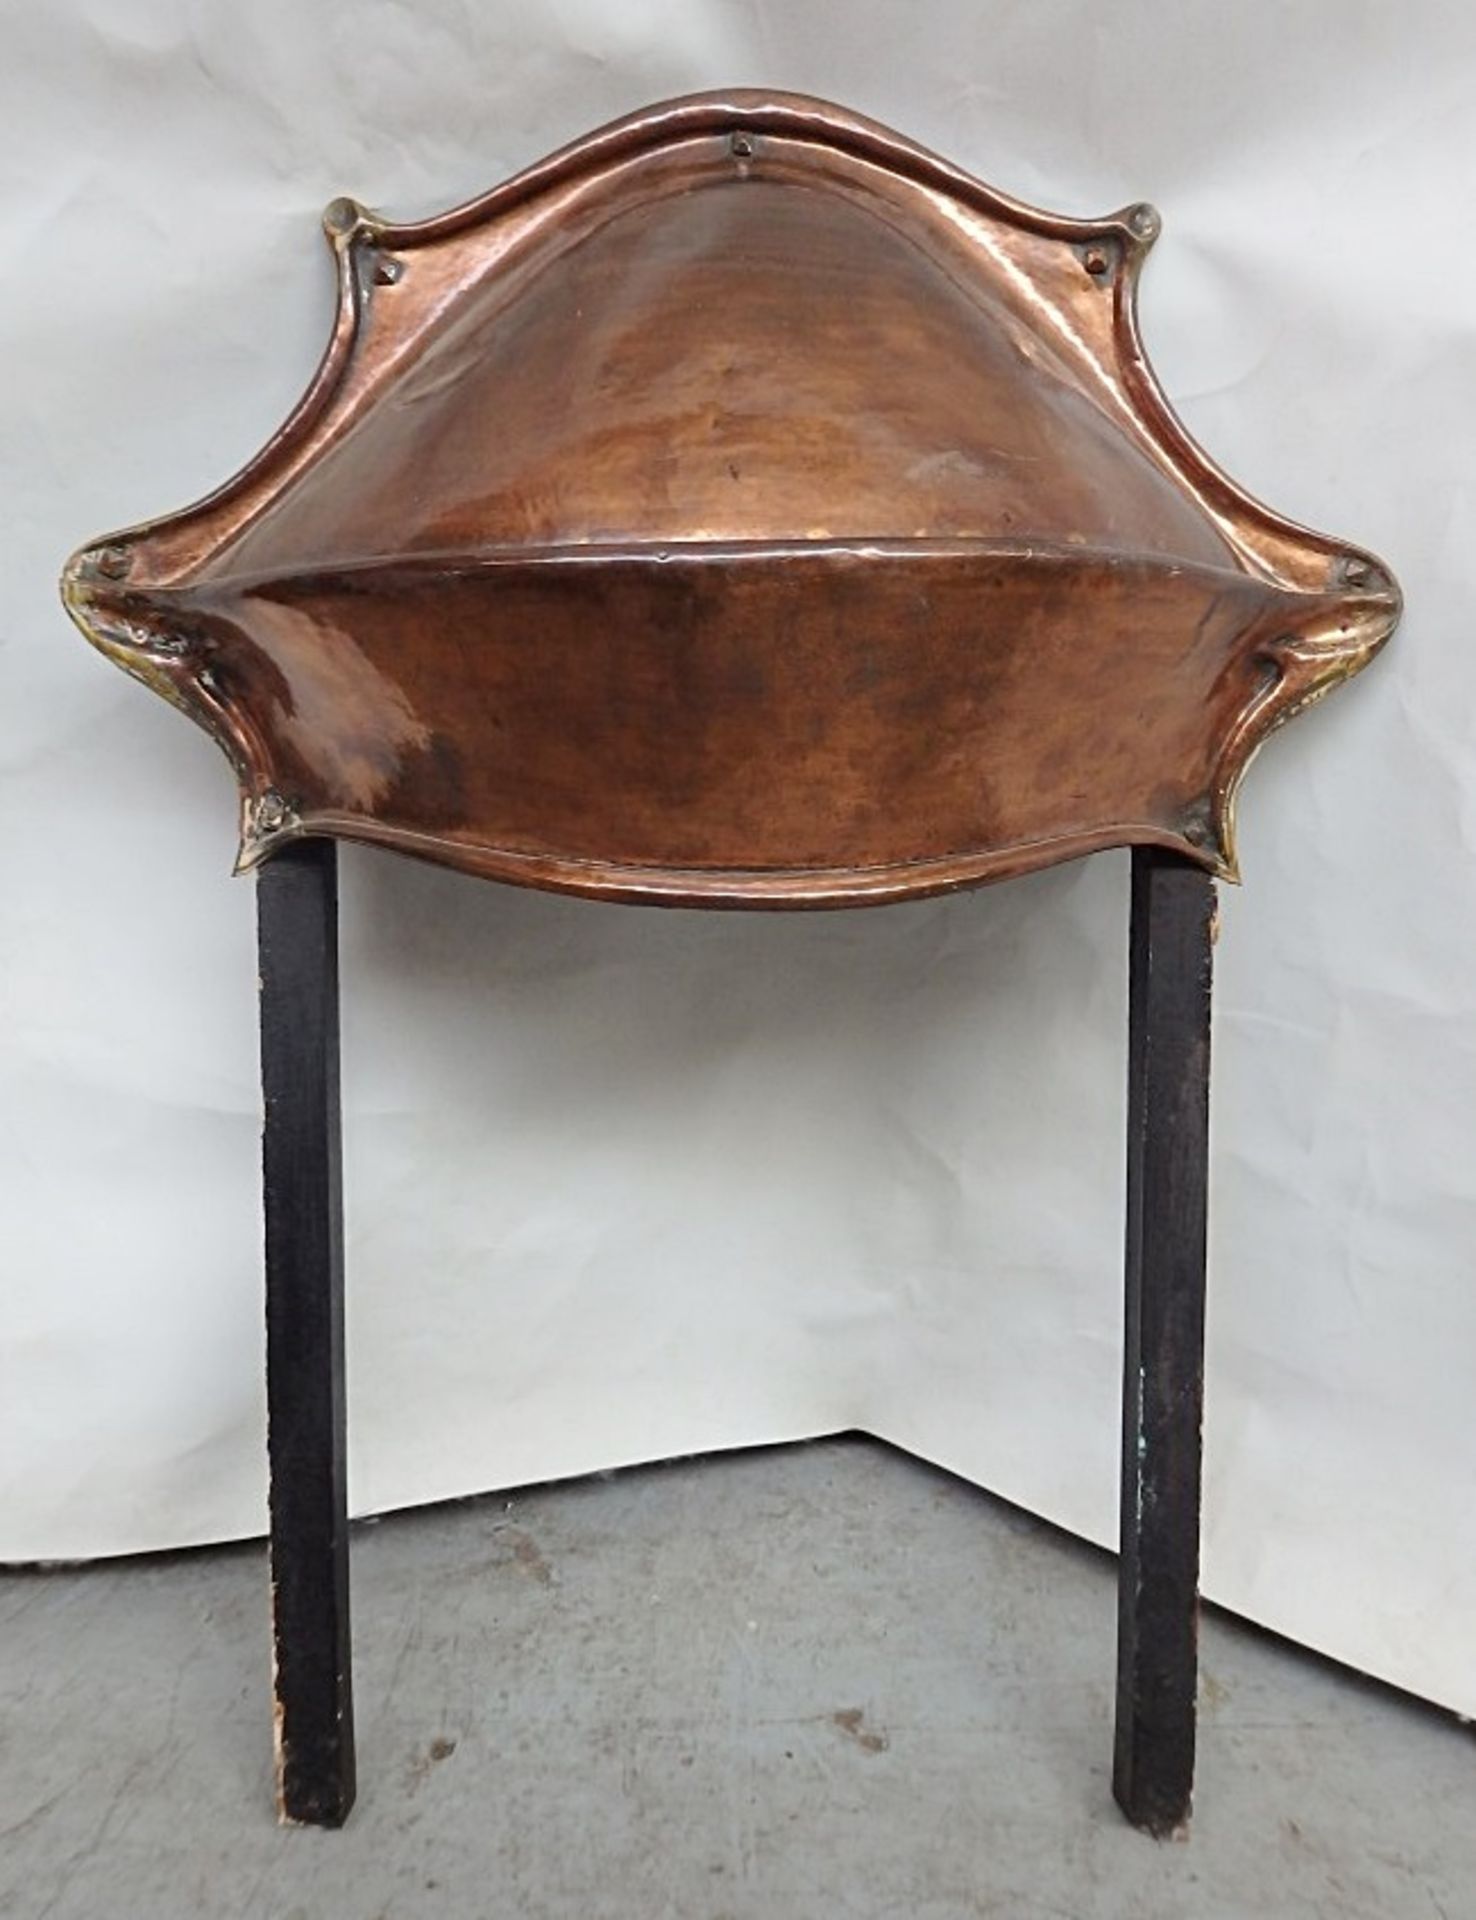 1 x Reclaimed Vintage Copper Fireplace Hood - Features An Attractive Art nouveau Form In Copper - Di